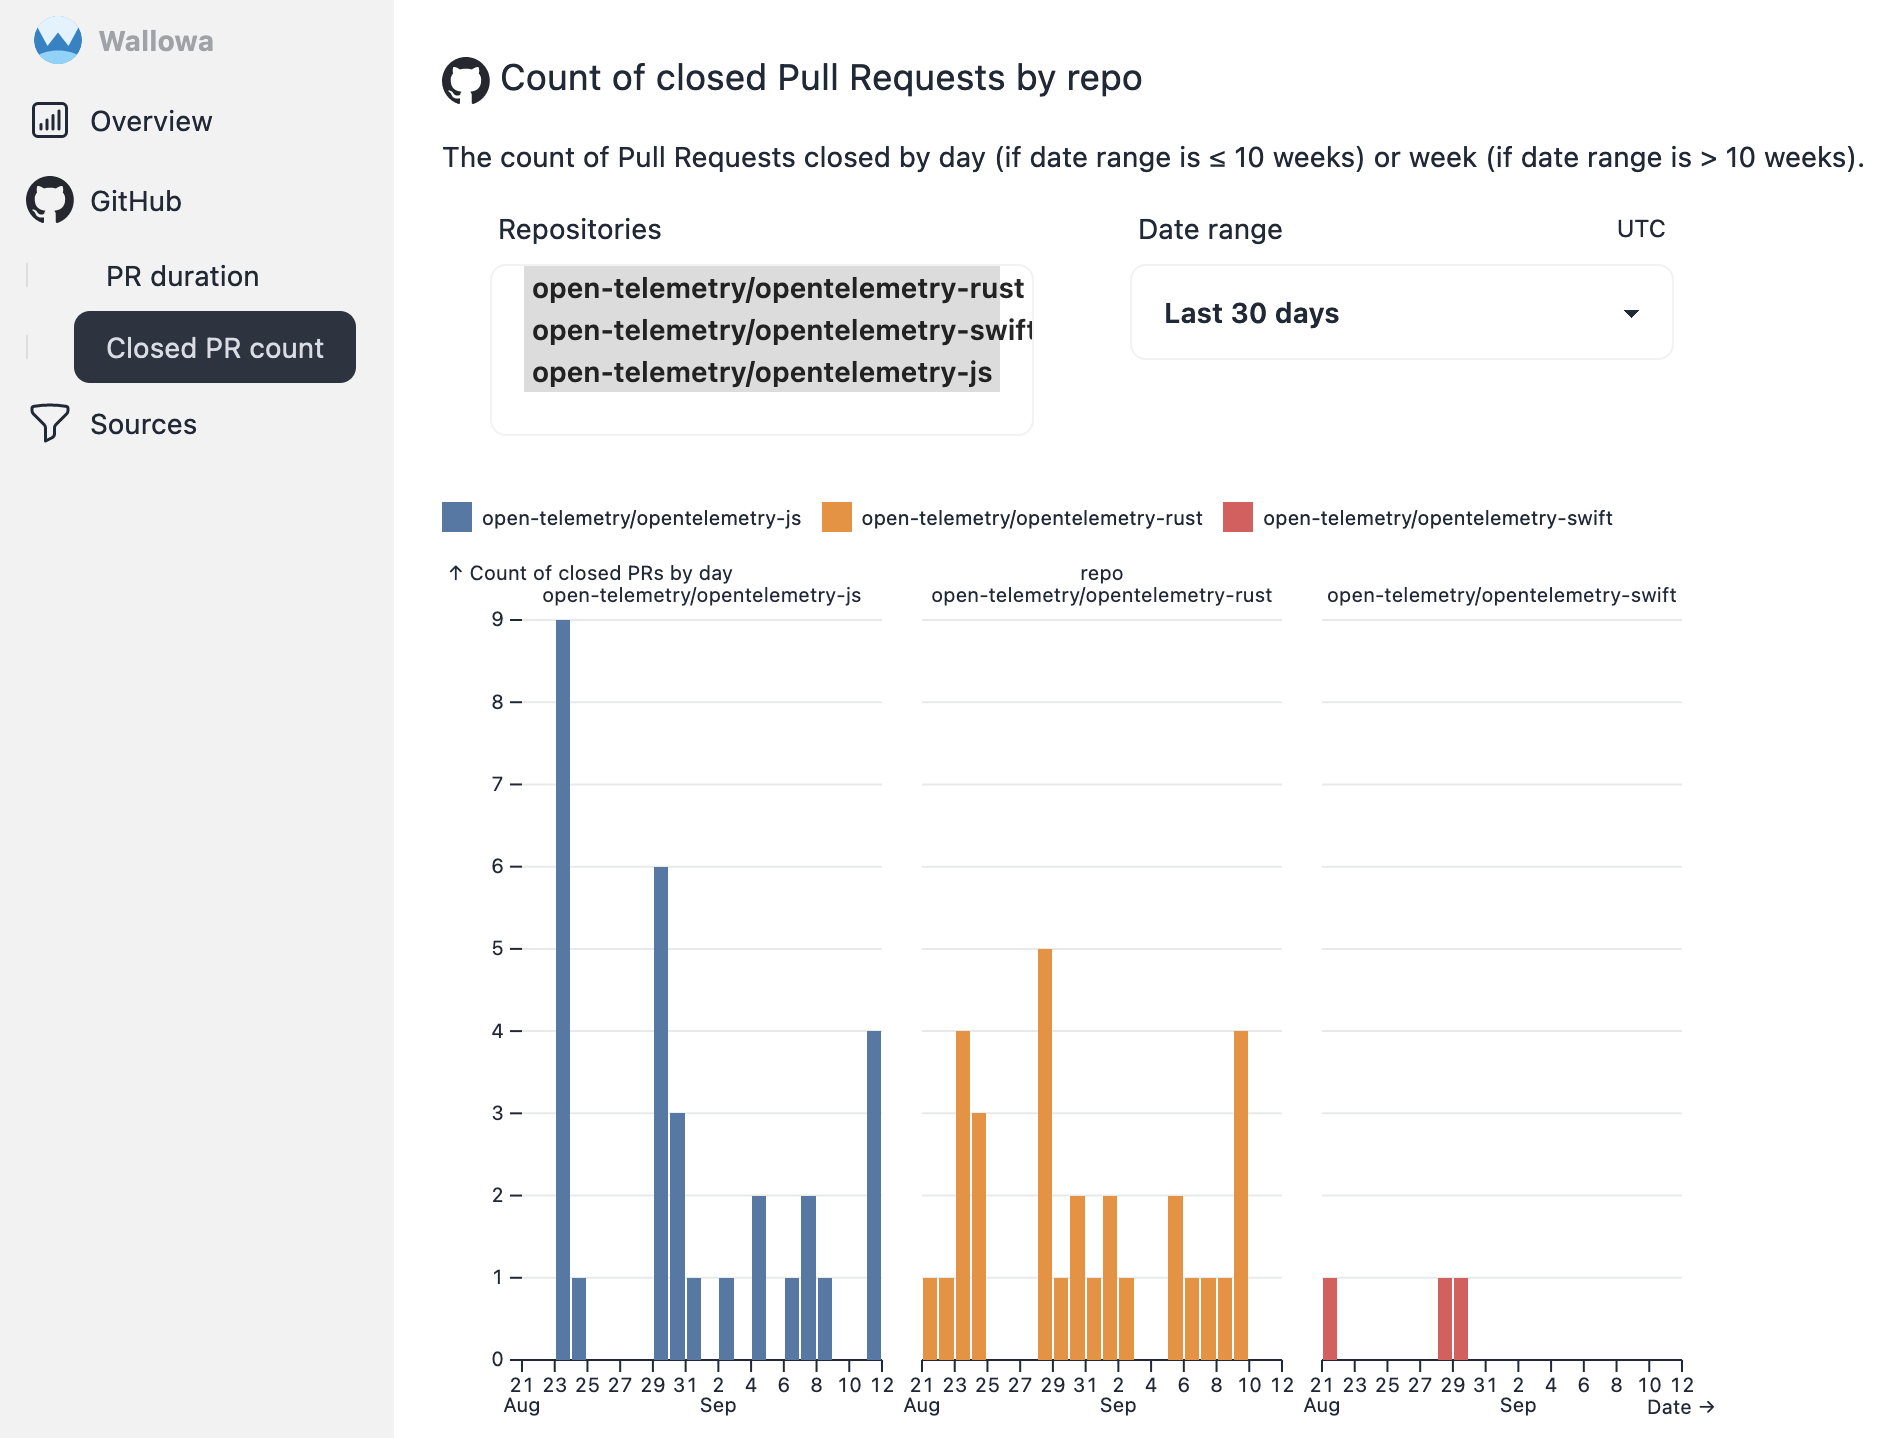 Screenshot of the GitHub Pull Request duration by repo chart